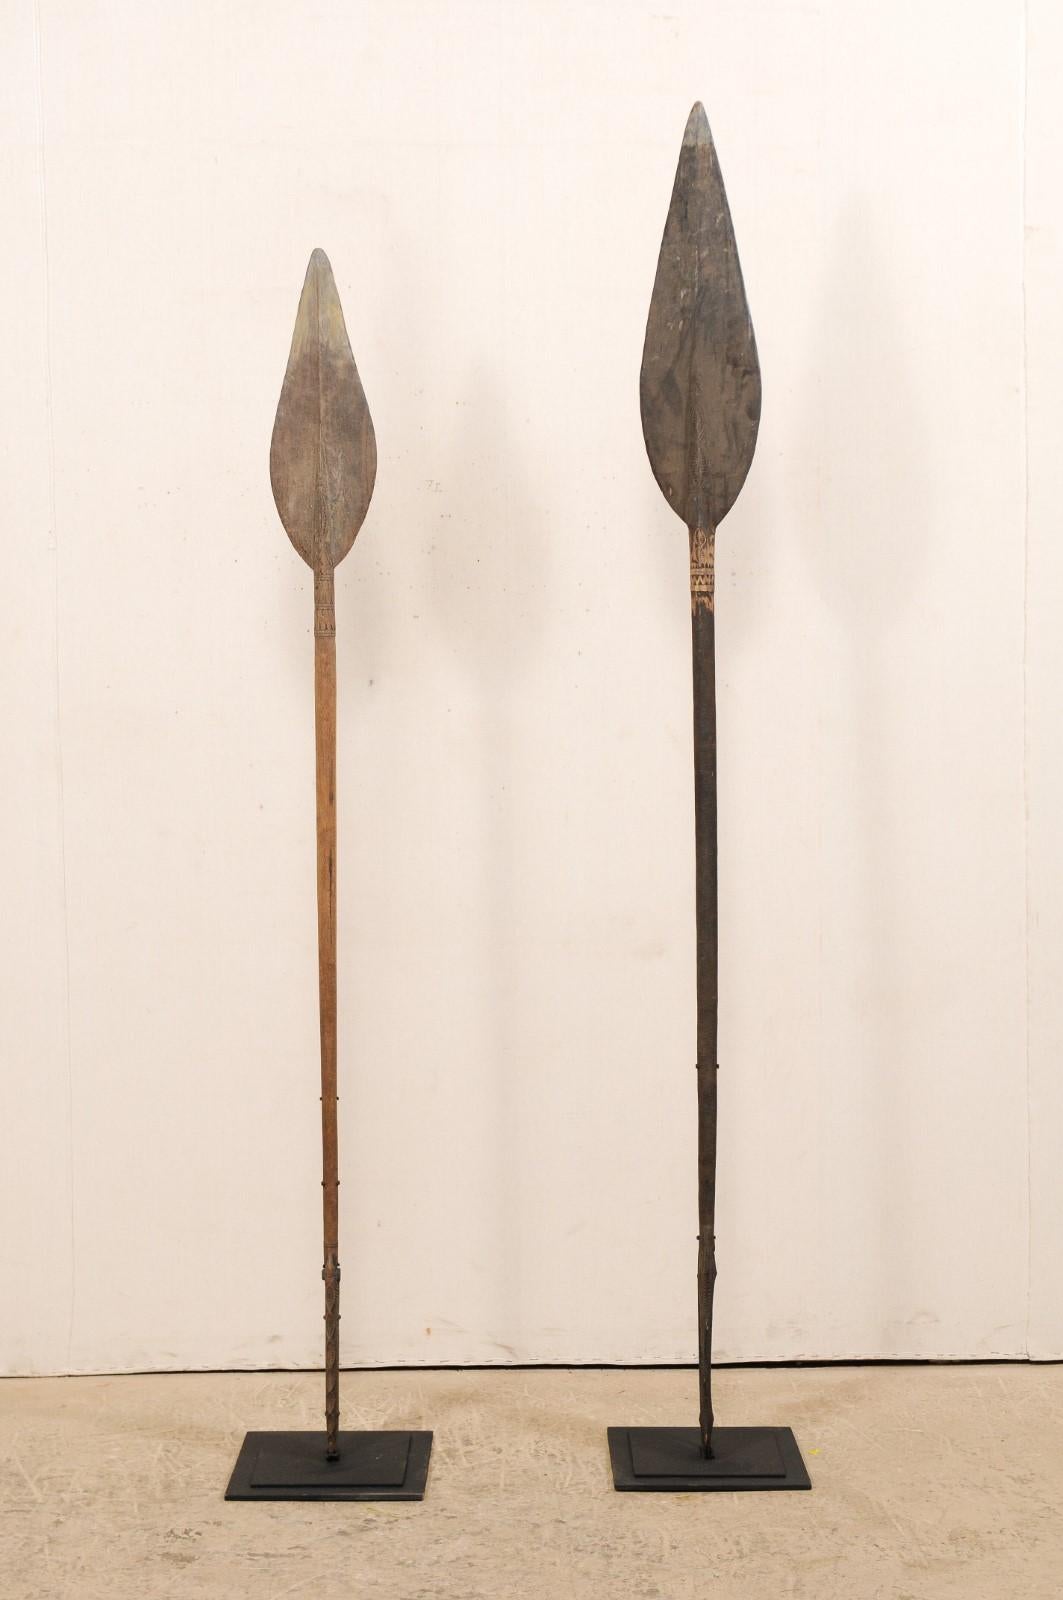 A pair of vintage Papua New Guinea carved wood canoe steering paddles on custom stands. This pair of carved wood paddles originate from along the Sepik river regions of Papua New Guinea. These river and oceanic pieces have spear-like tips at one